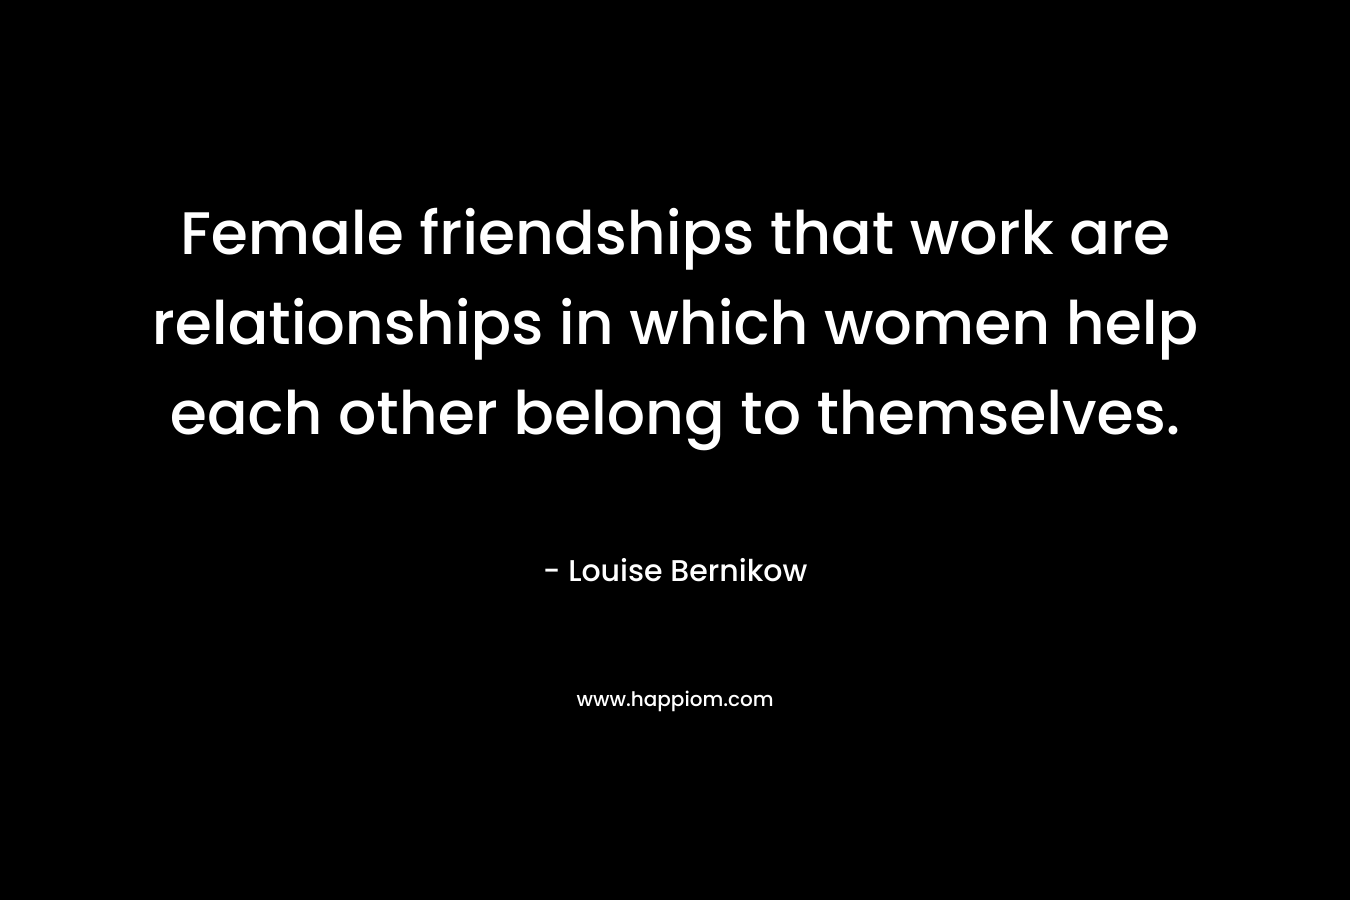 Female friendships that work are relationships in which women help each other belong to themselves.